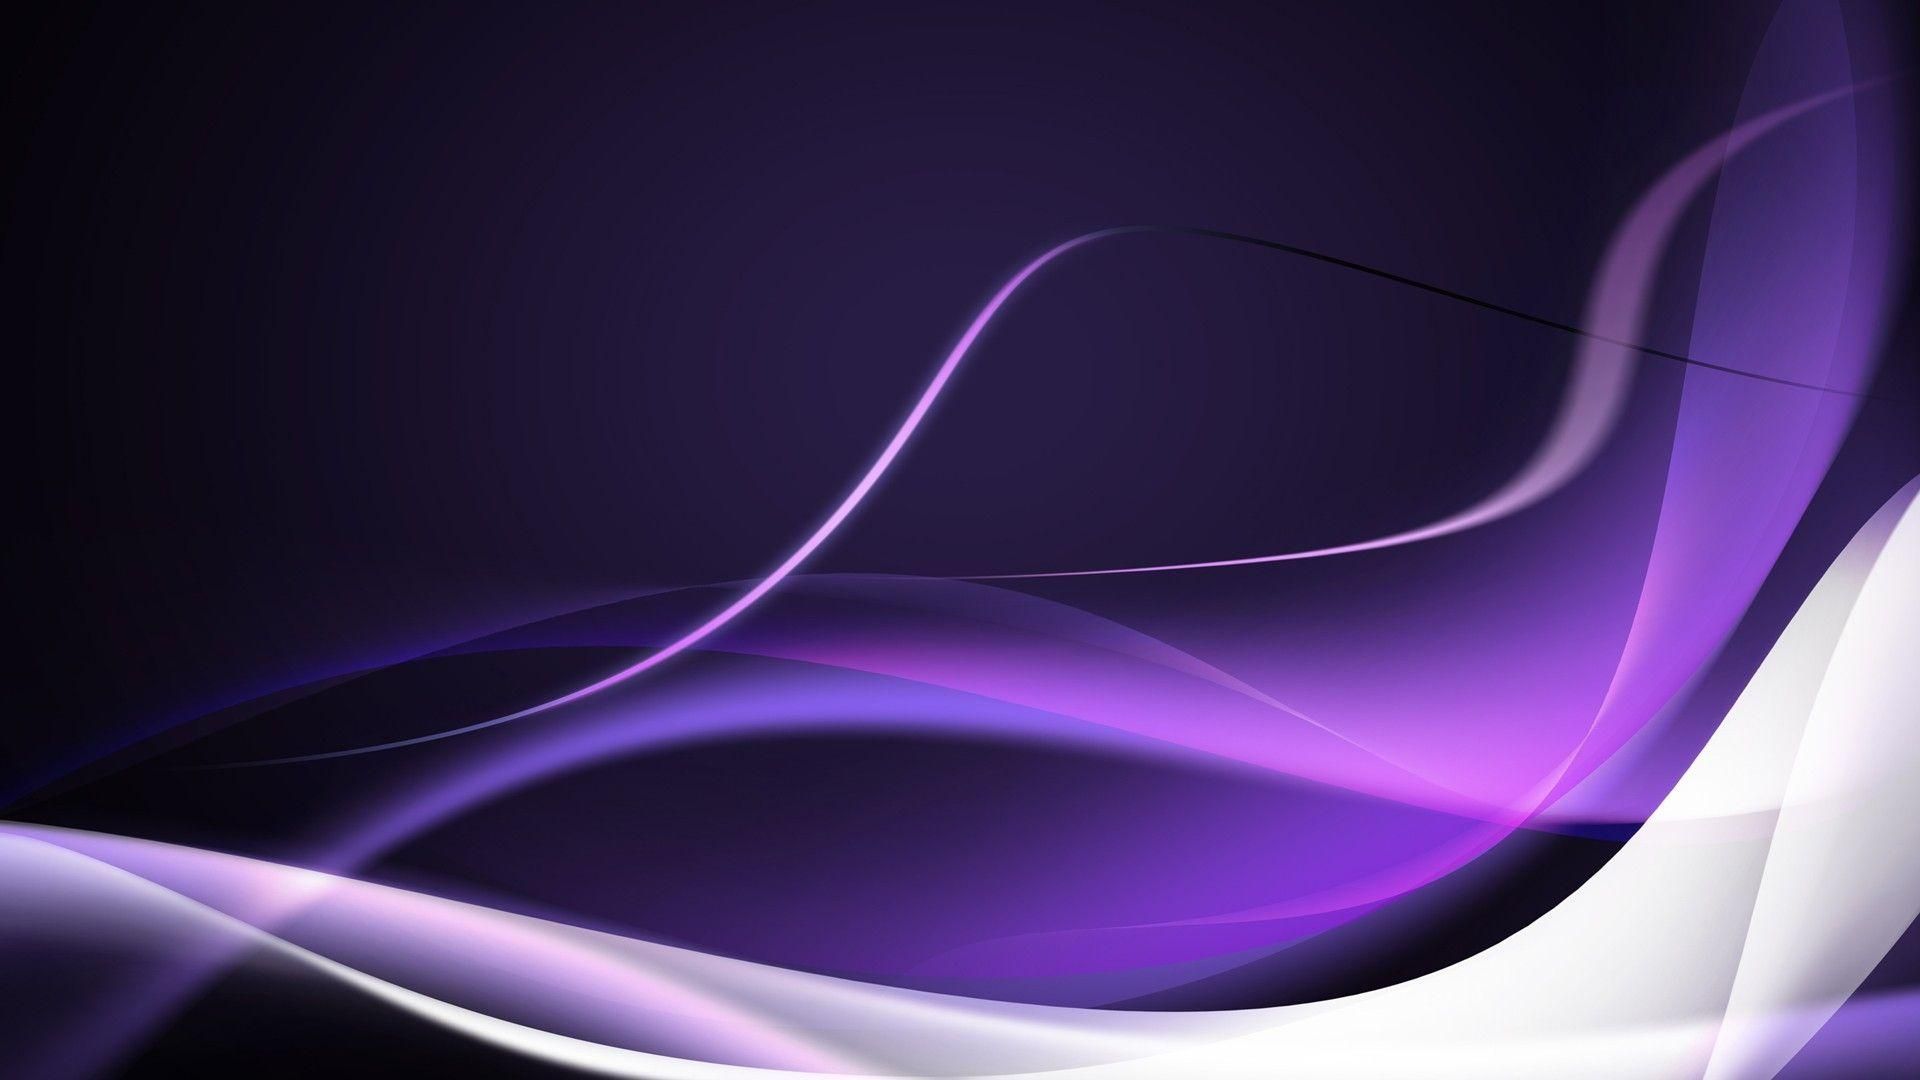 Green And Purple full hd wallpaper for laptop